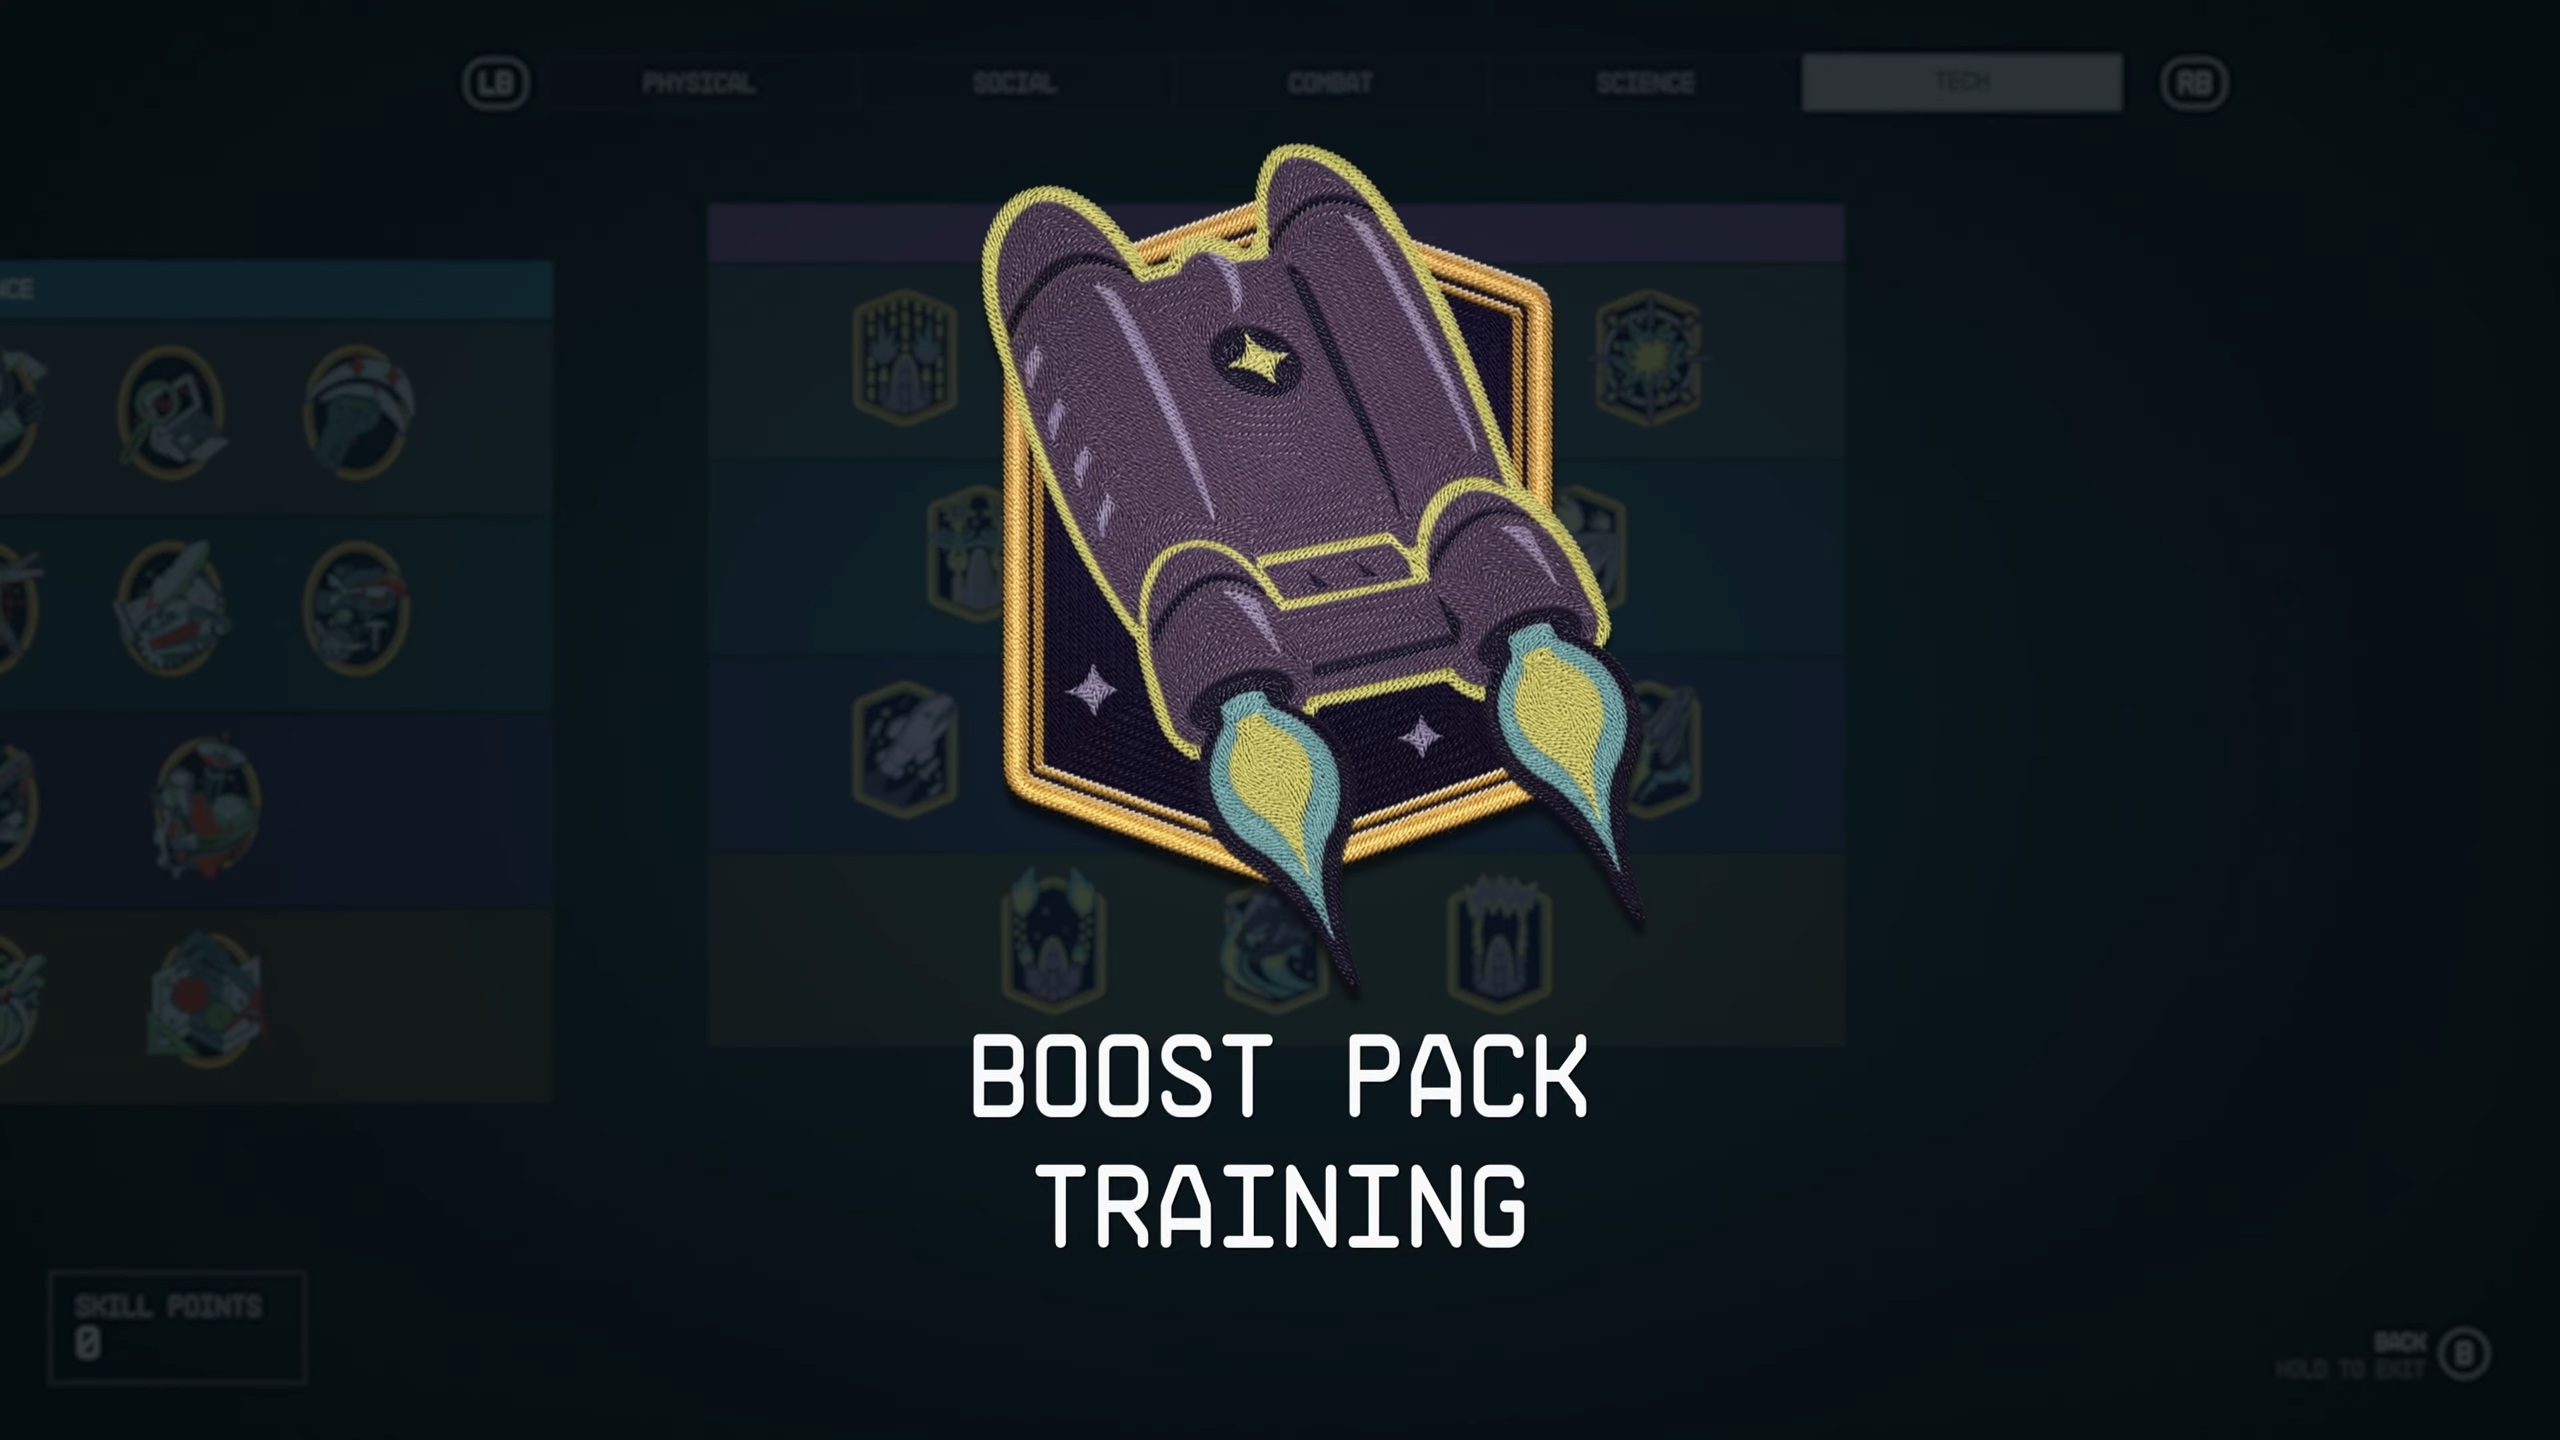 Booster packs on steam фото 79